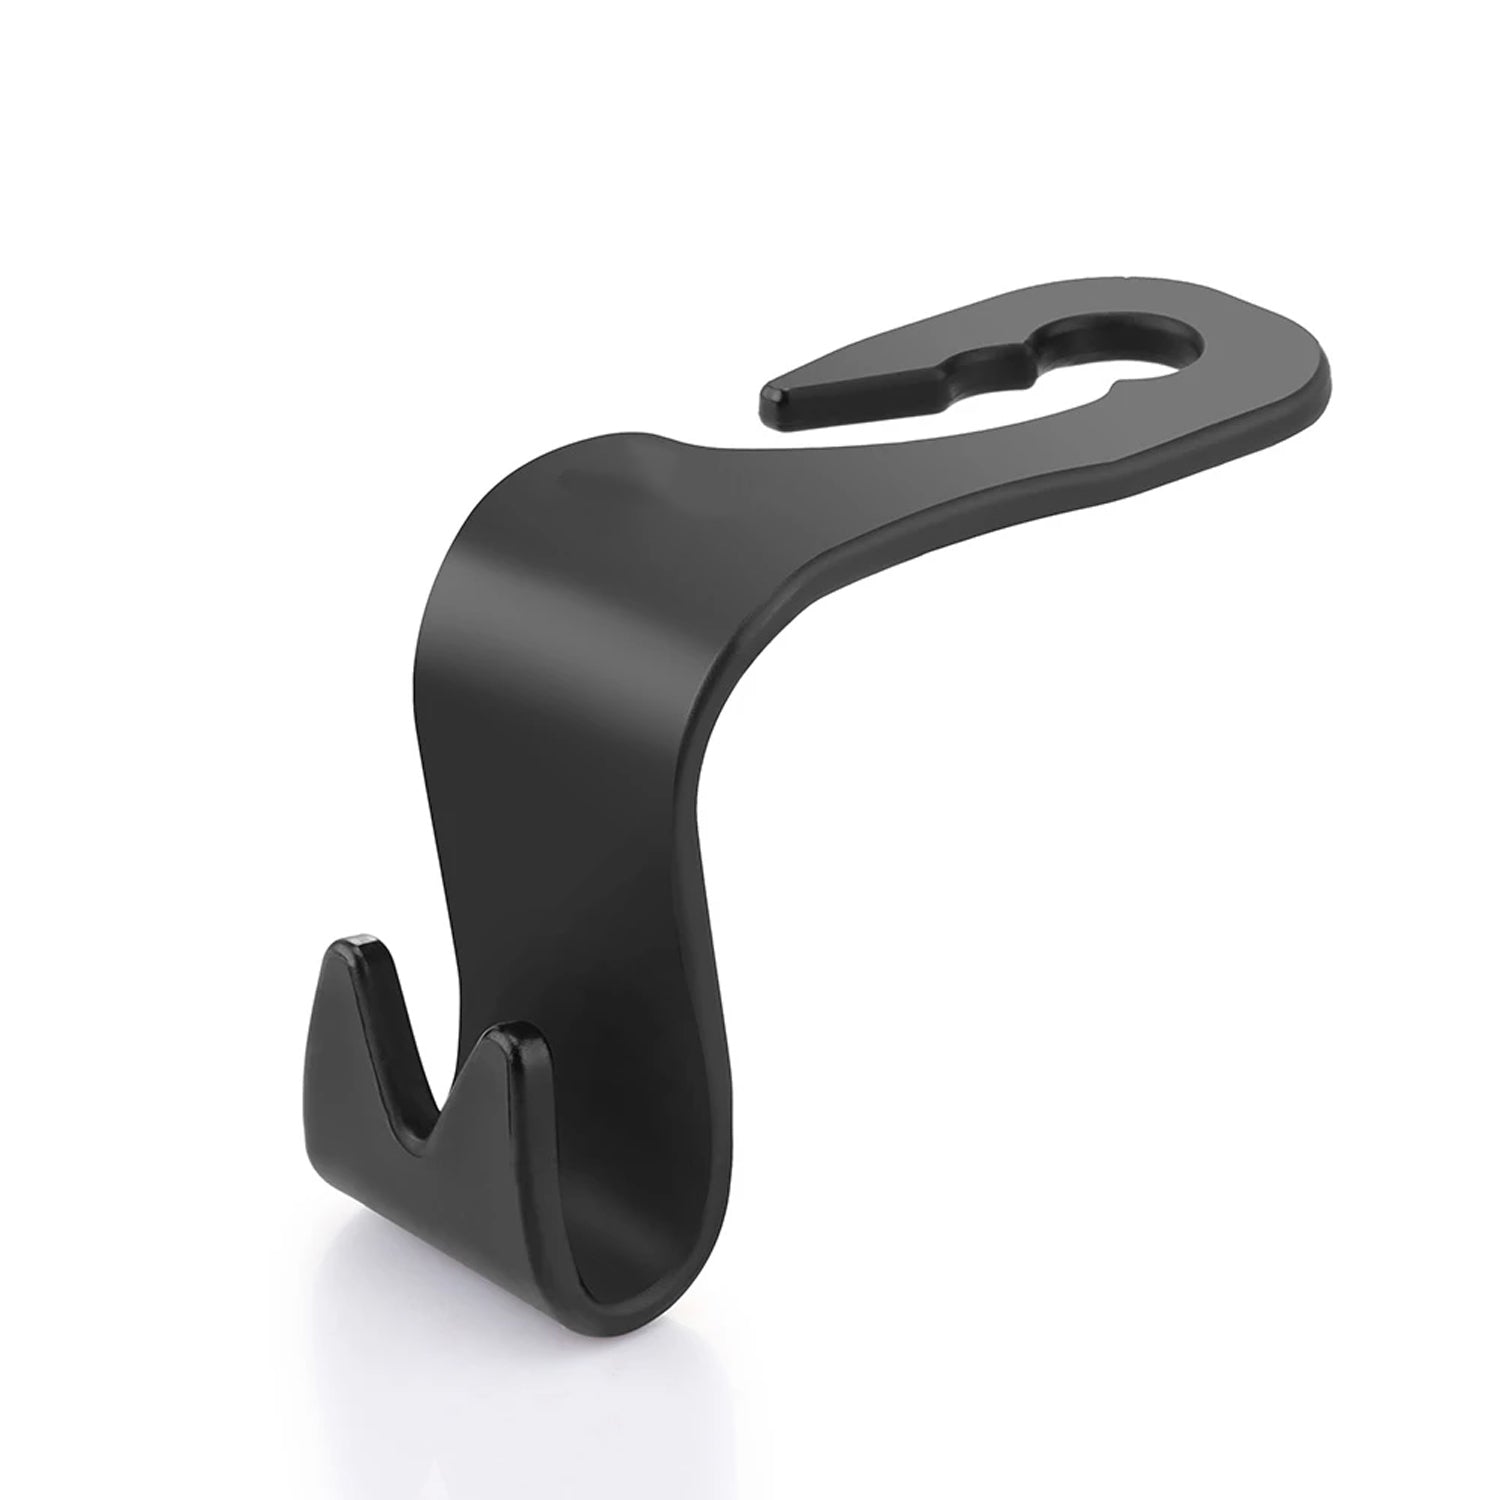 9005 Car Backrest Hanger and backrest stand for giving support and stance to drivers. 